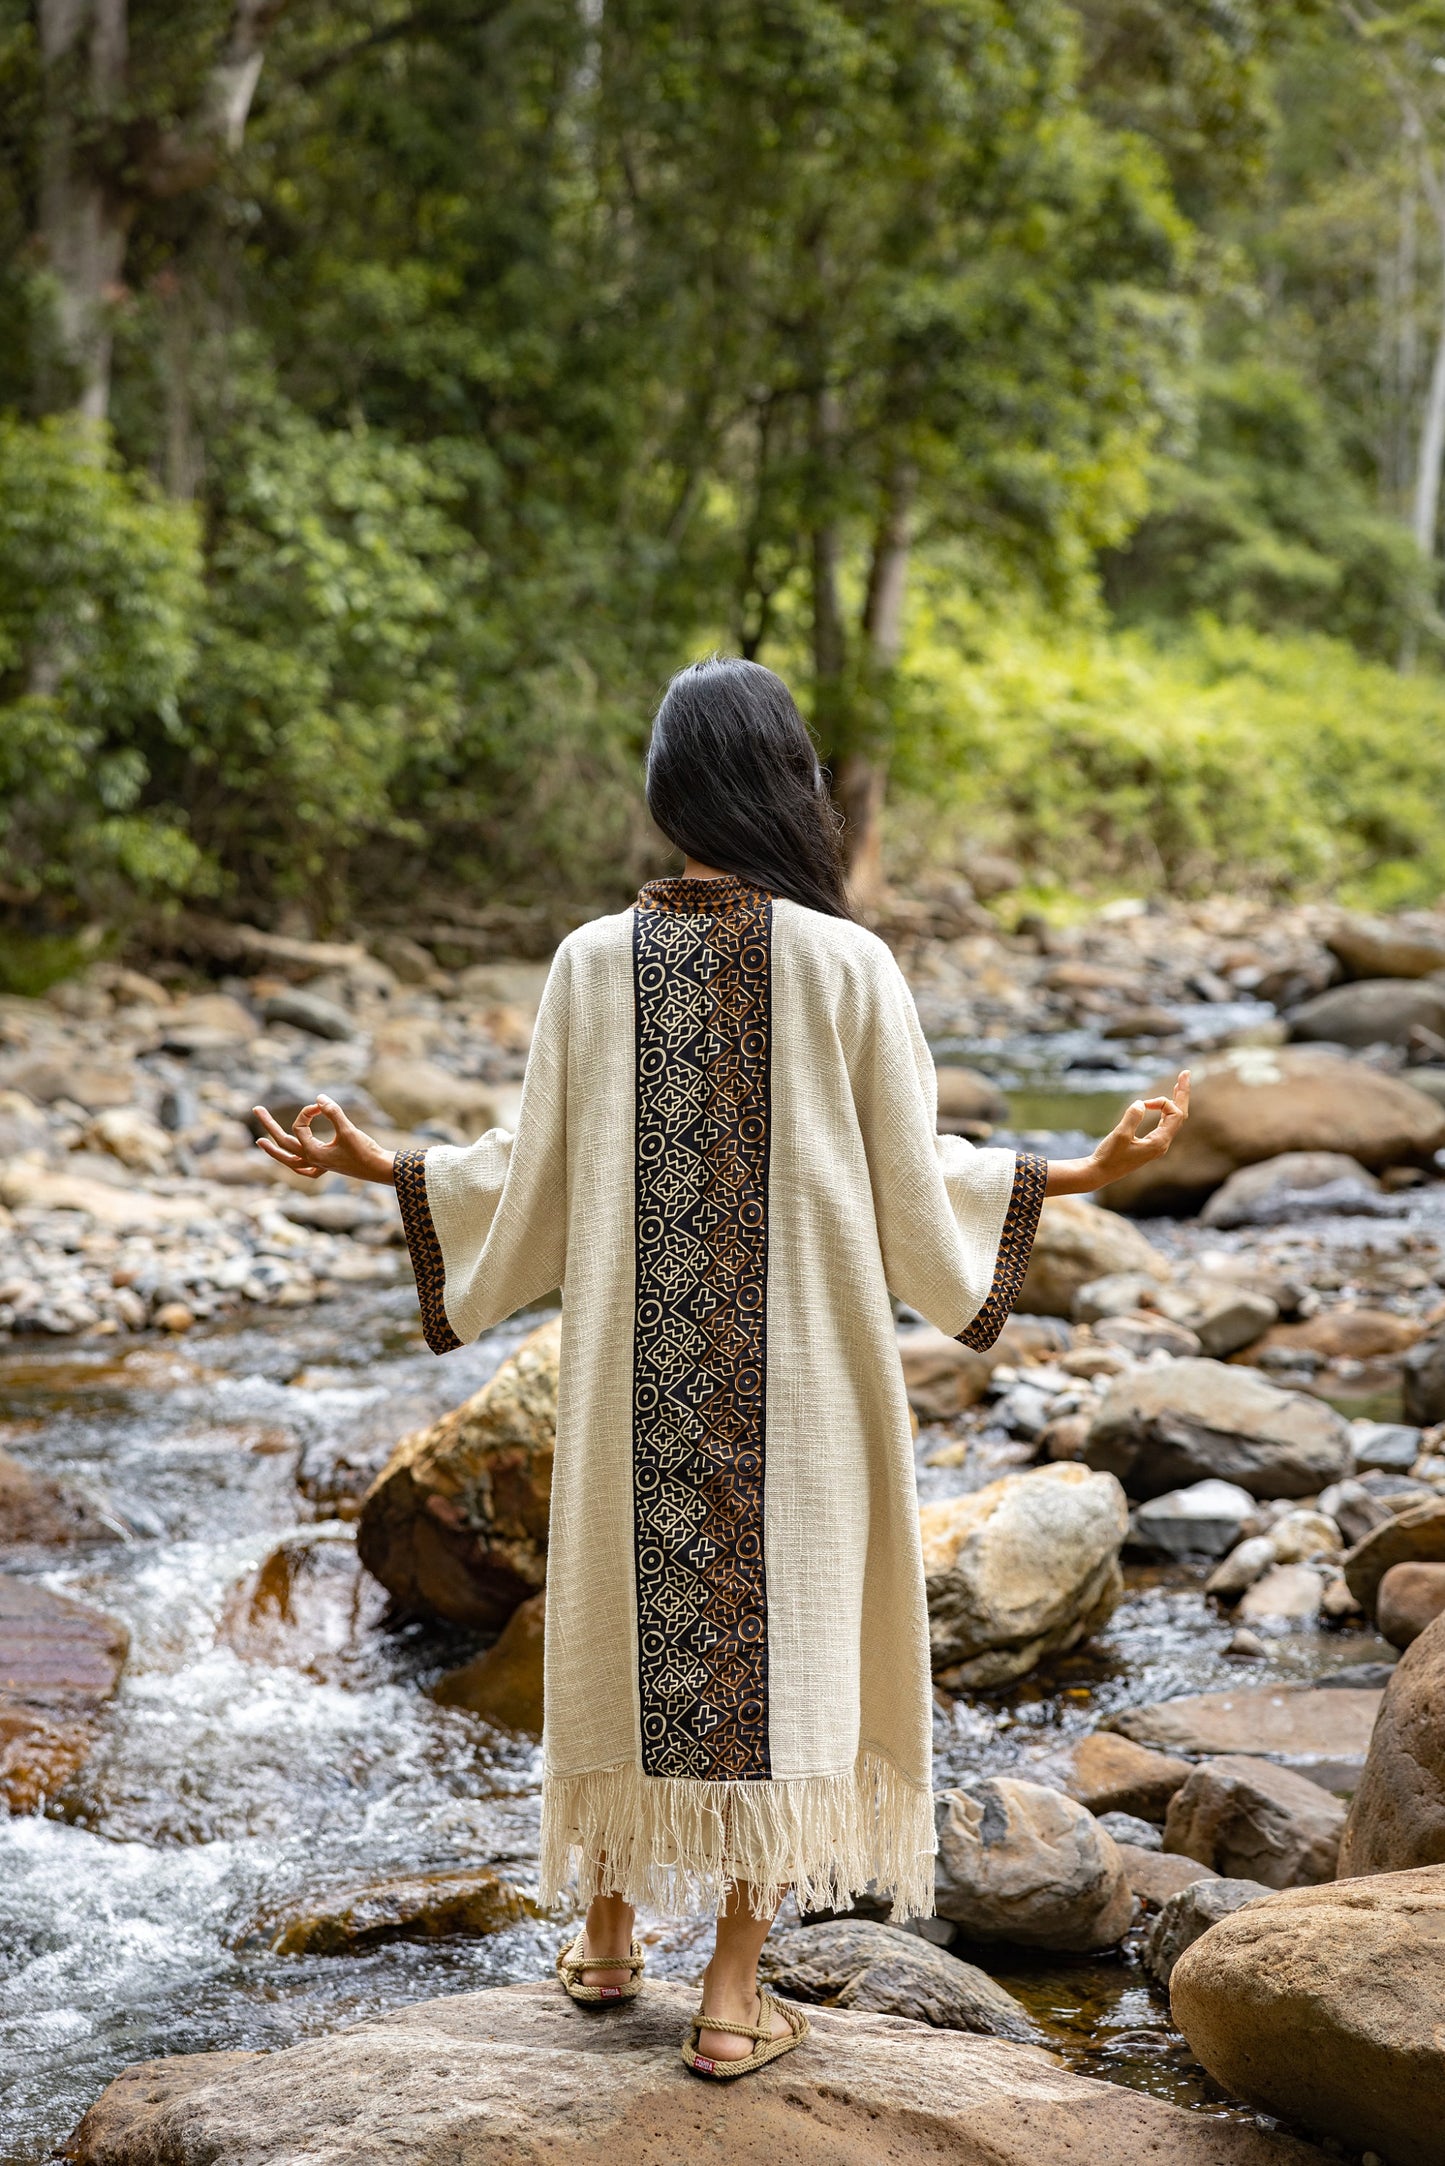 Our handmade BUNTU tribal African simple kimono is a unique and one-of-a-kind piece that is sure to add some flair to your wardrobe. Made of 100% textured cotton, it is comfortable and breathable, perfect for any occasion.